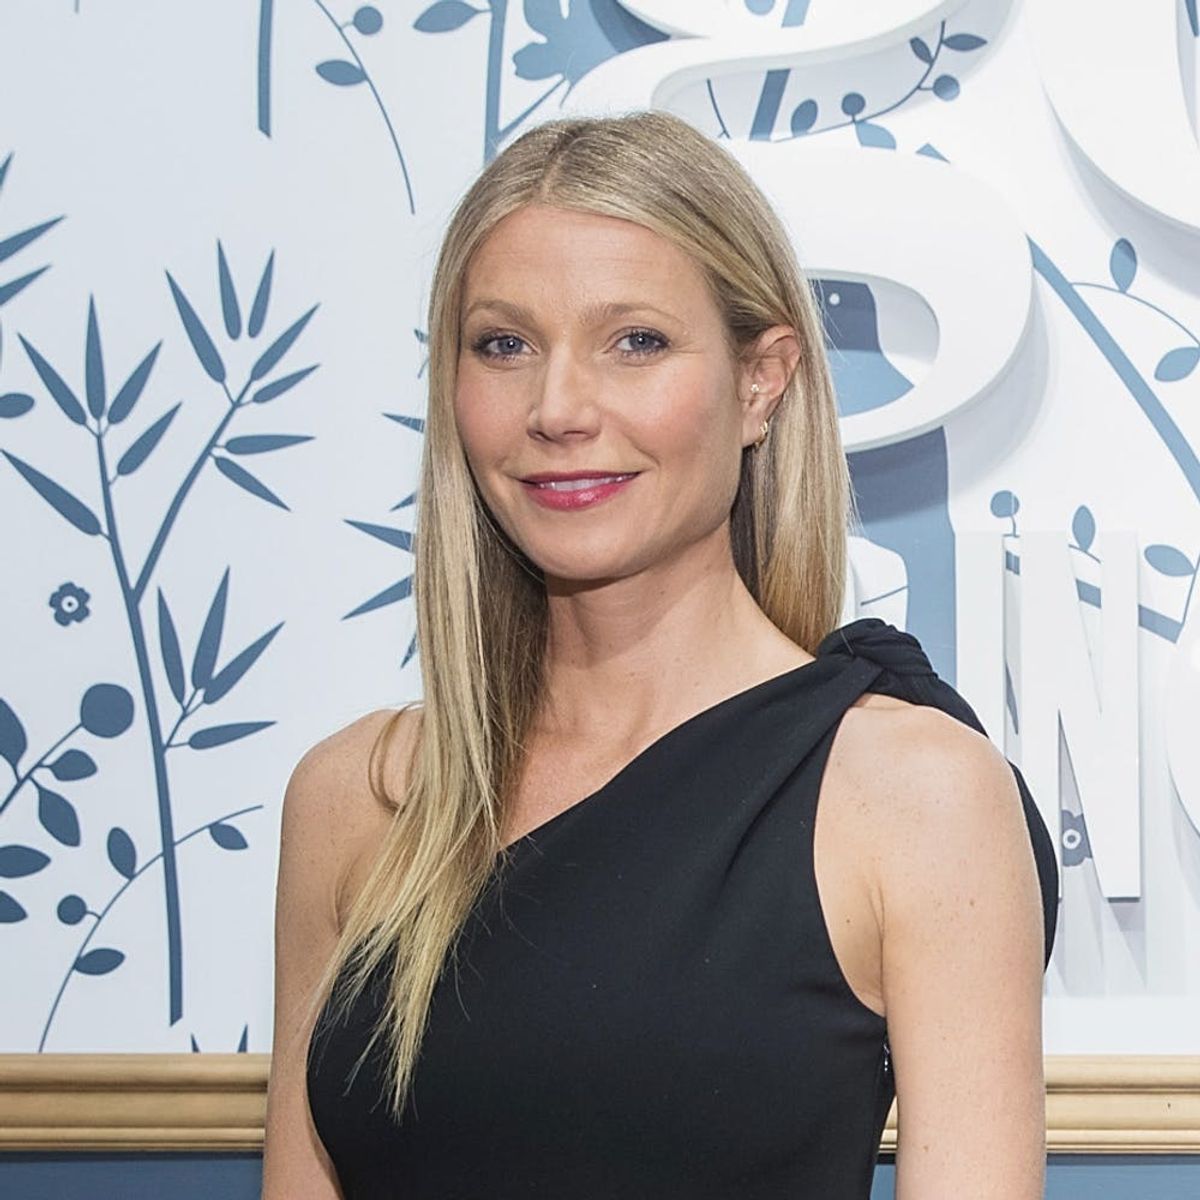 Megastars Gwyneth Paltrow and Angelina Jolie Just Came Forward With Personal Allegations Against Producer Harvey Weinstein